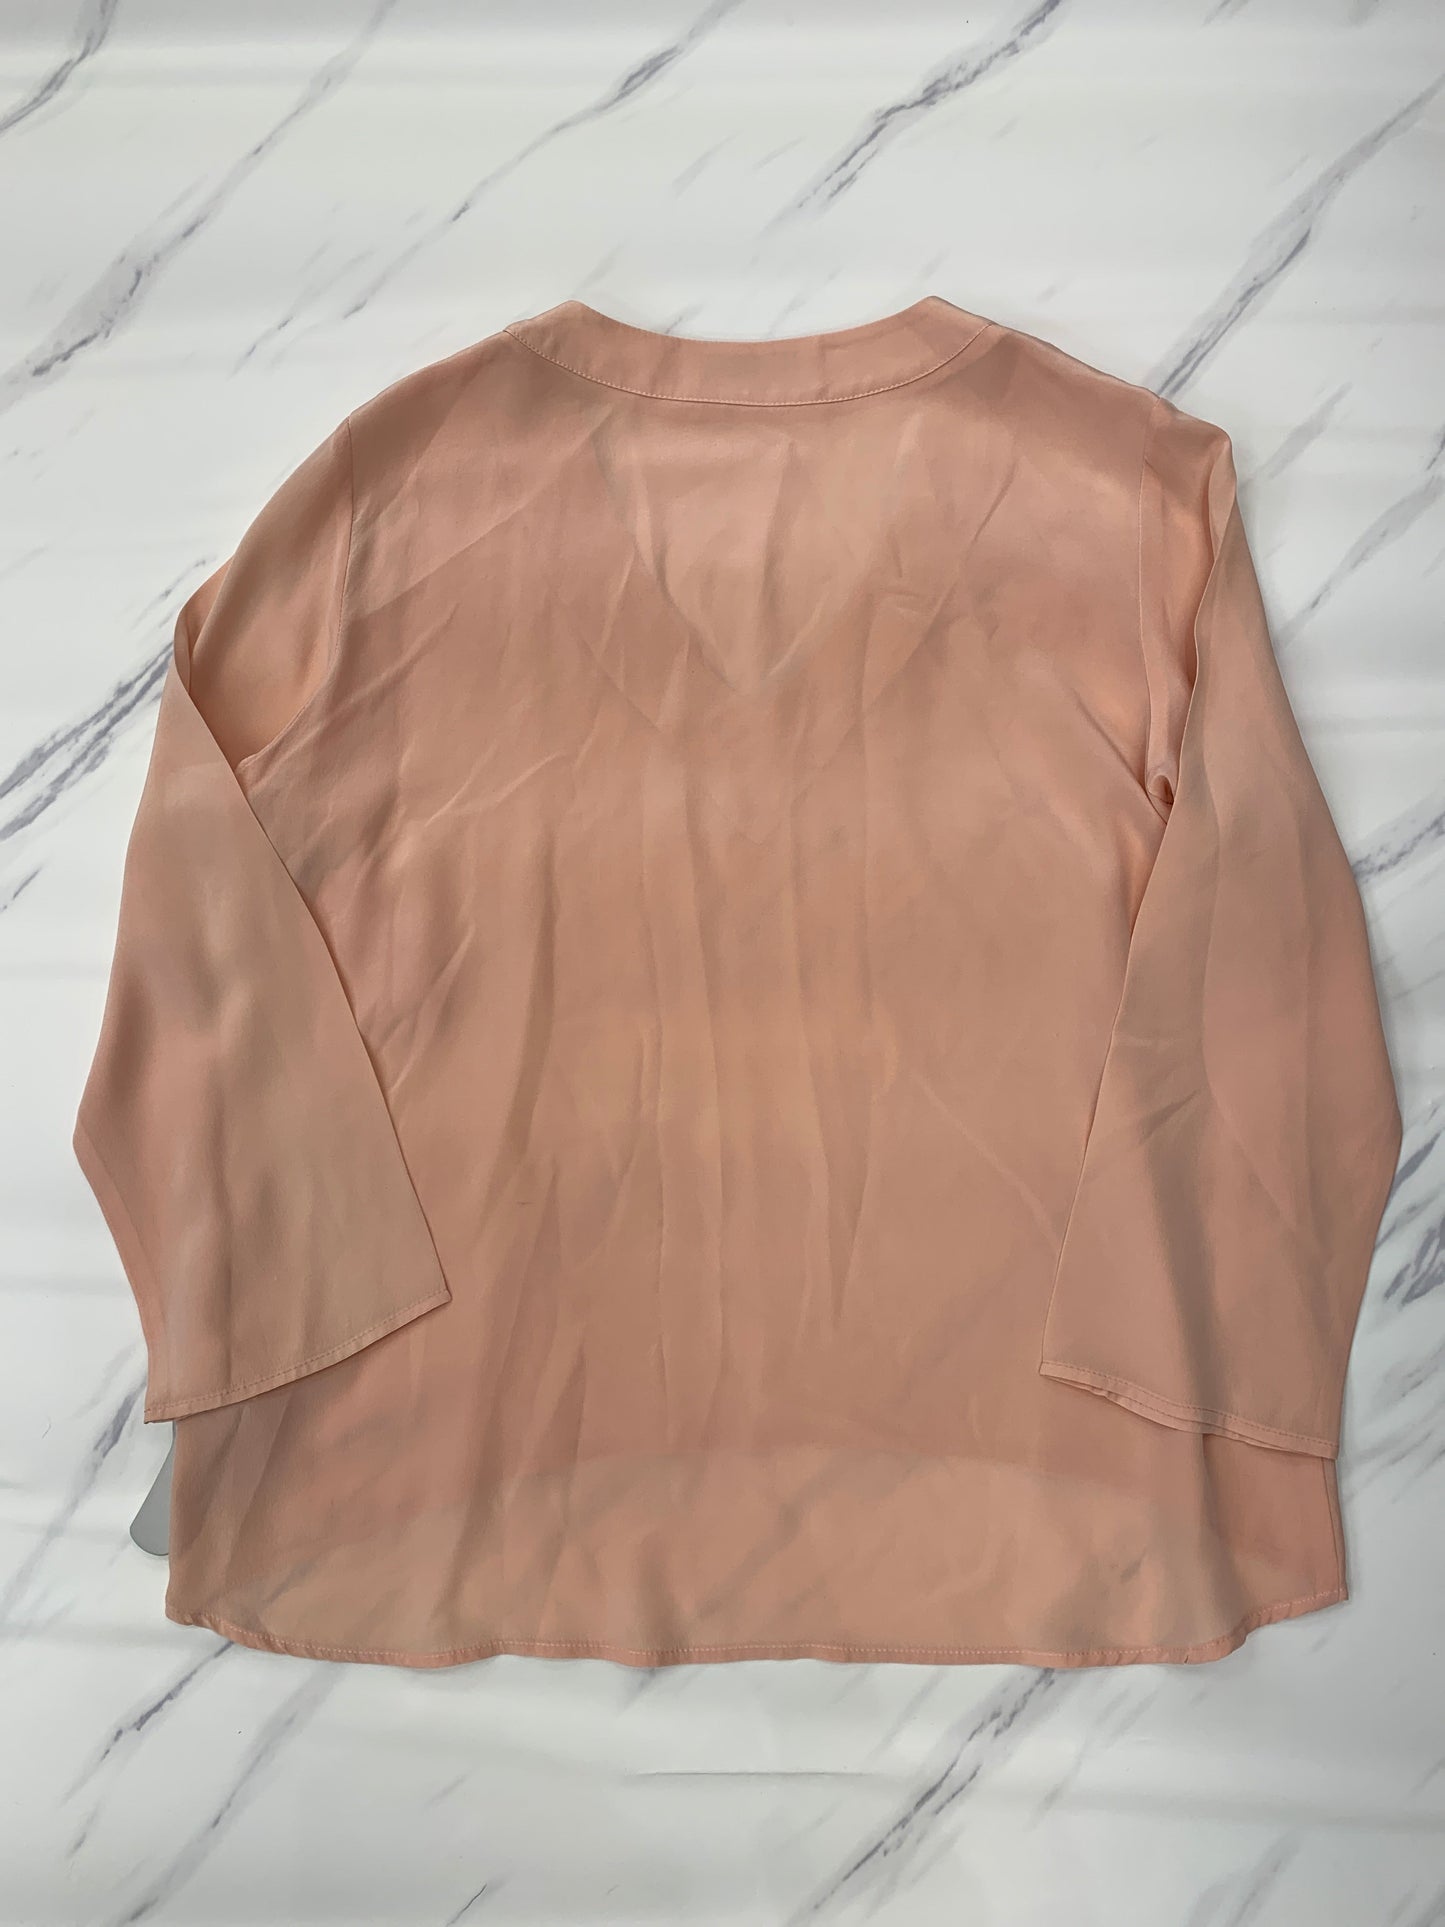 Top Long Sleeve By Cma  Size: L